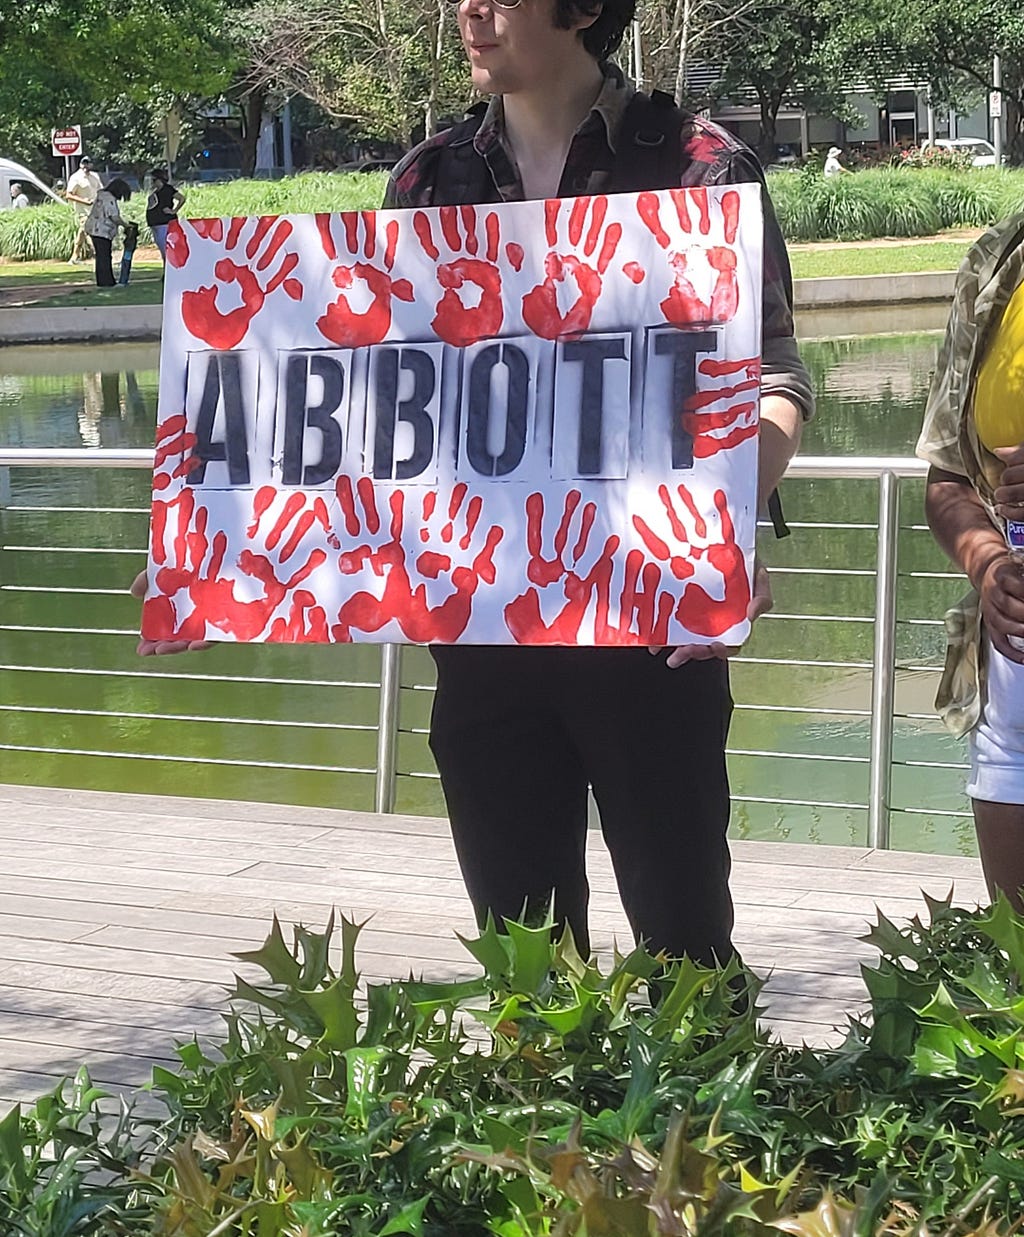 An anti gun violence protester raises a sign showing red hand prints around the name “Abbott,” referring to Governor Greg Abbott.